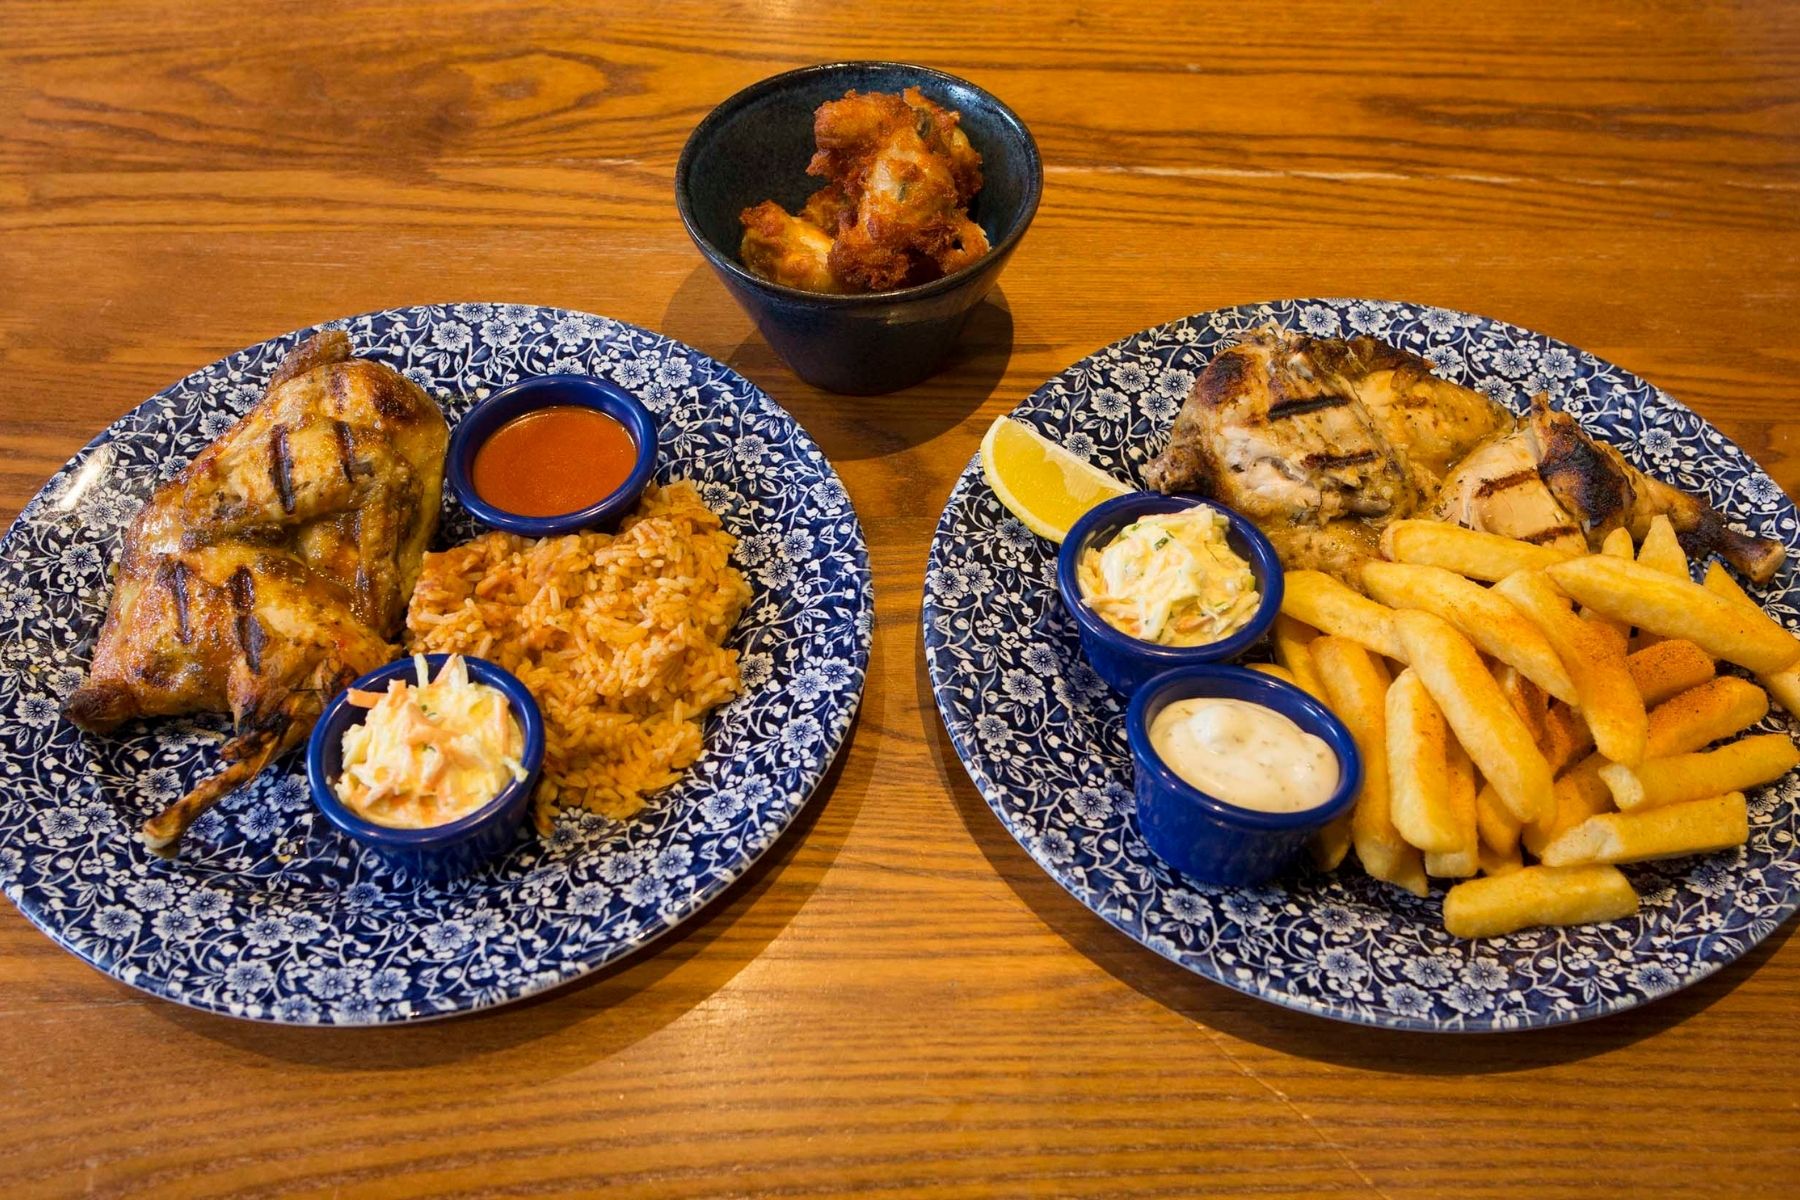 Two blue plates of grilled chicken and chips from JD Wetherspoon